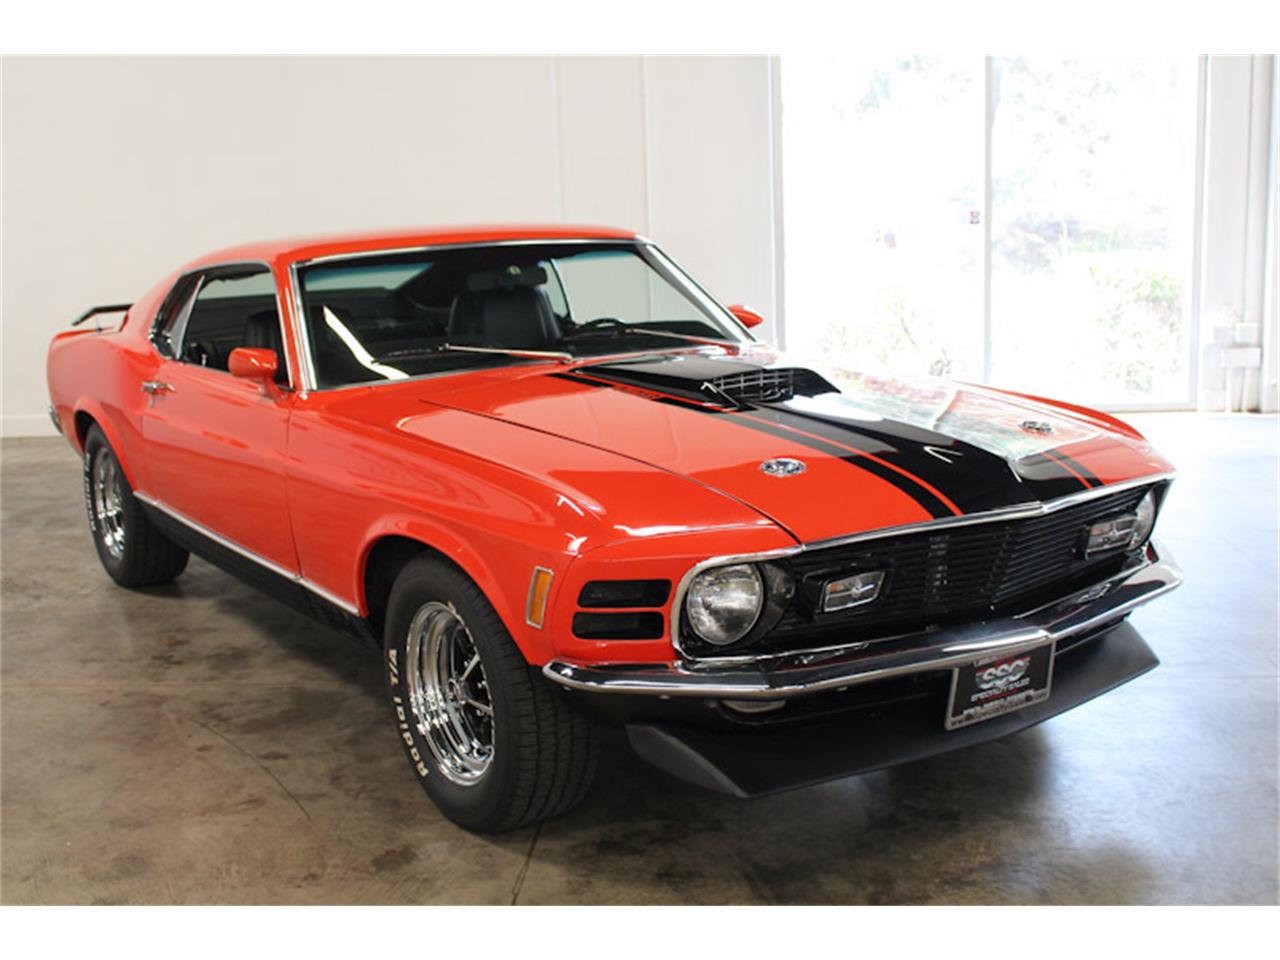 1970 Ford Mustang Mach 1 for Sale | ClassicCars.com | CC-1144926